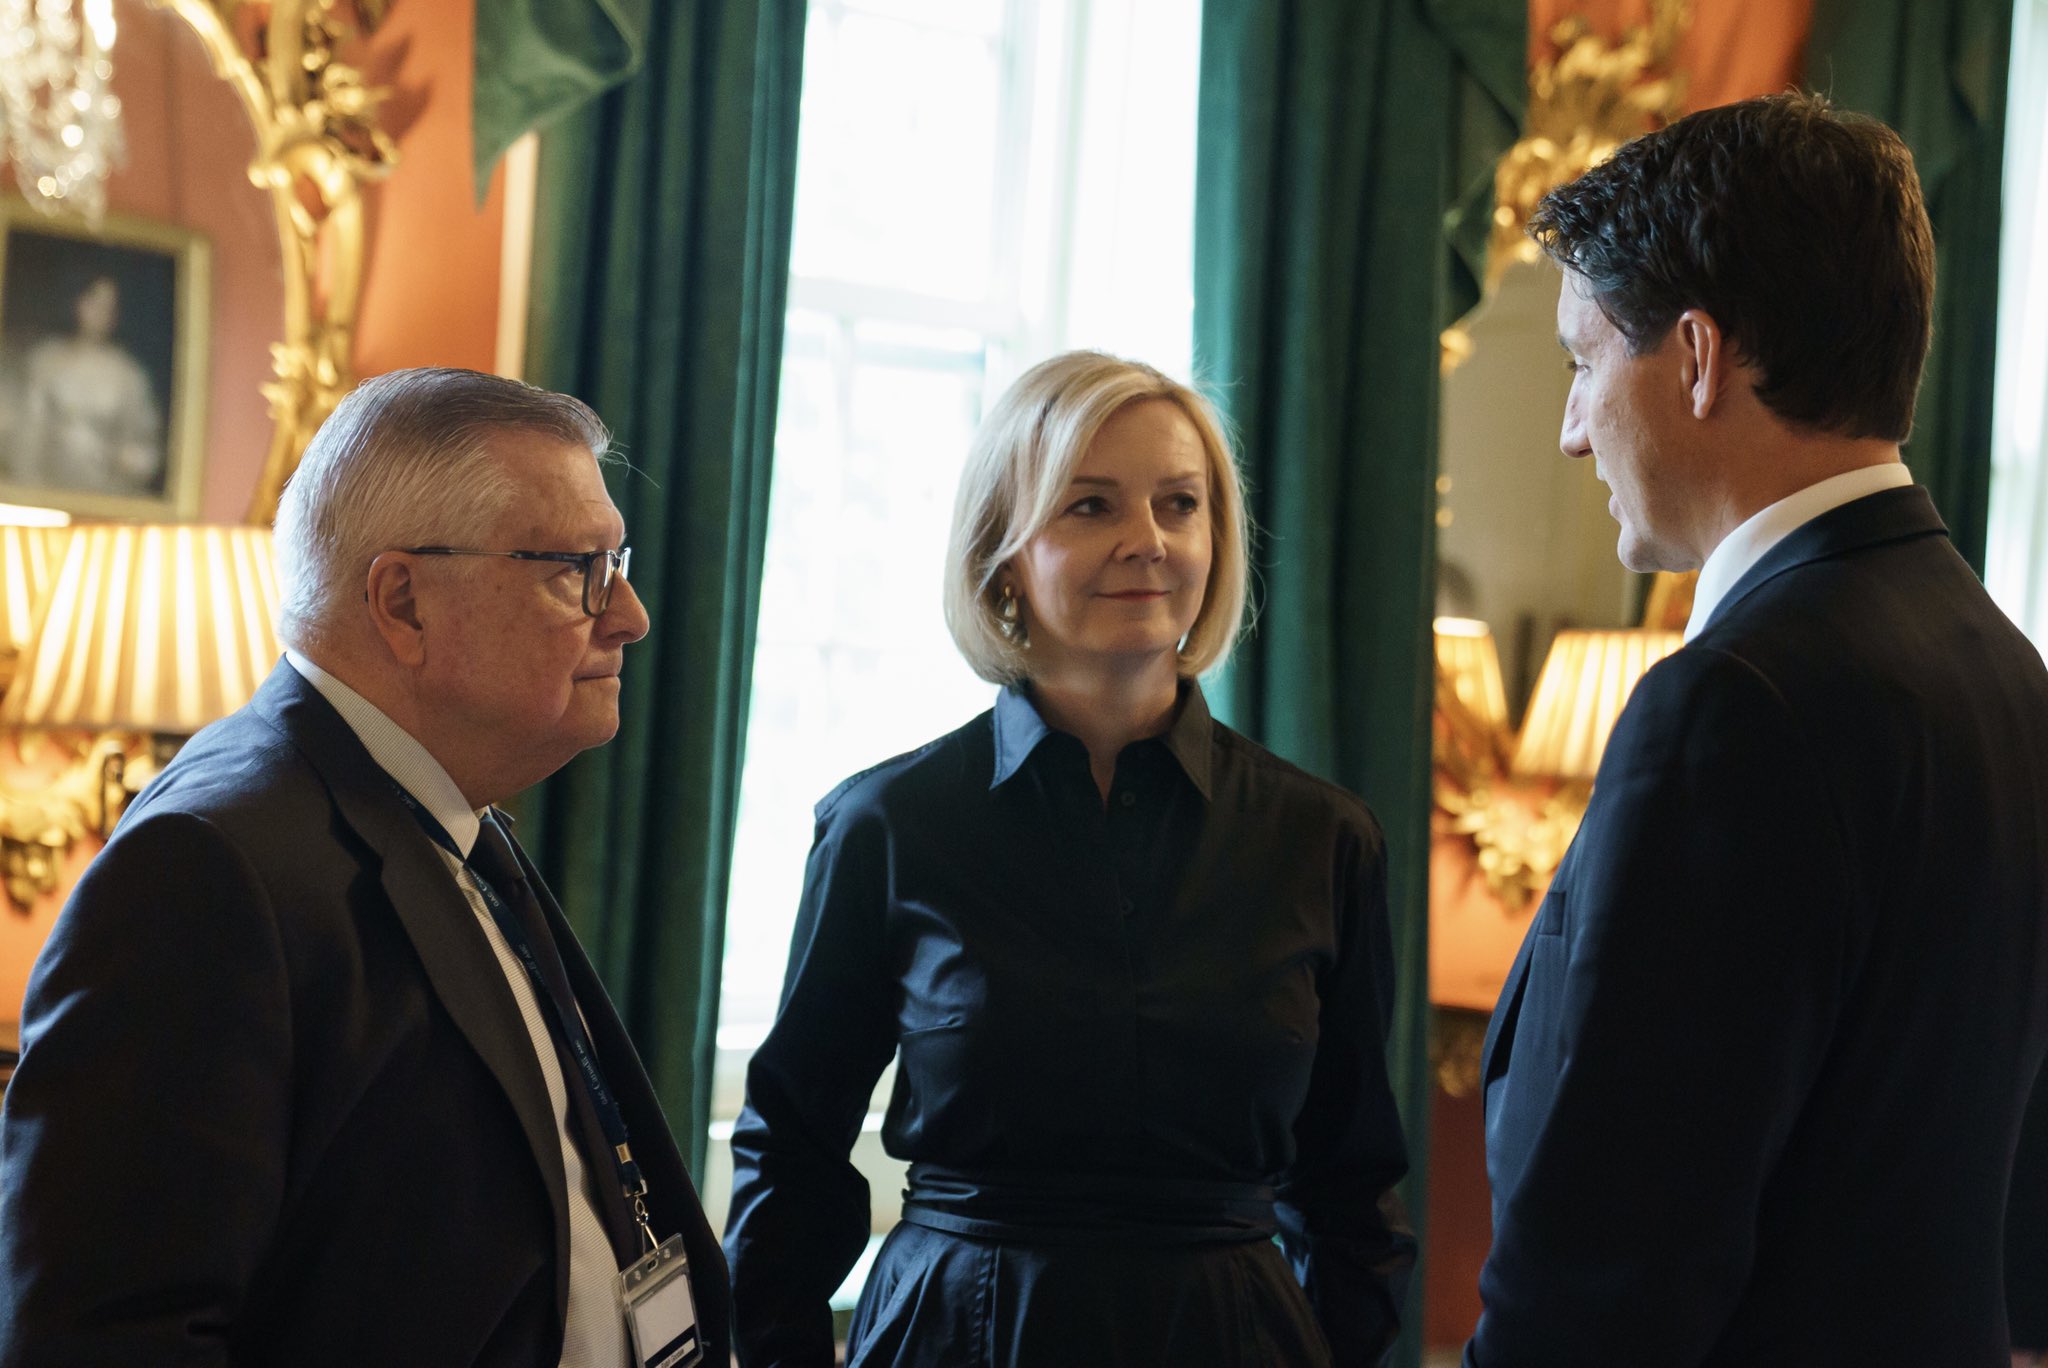 PM Trudeau meets with Truss, Ukraine PM and other world leaders ahead of Queen’s funeral in London